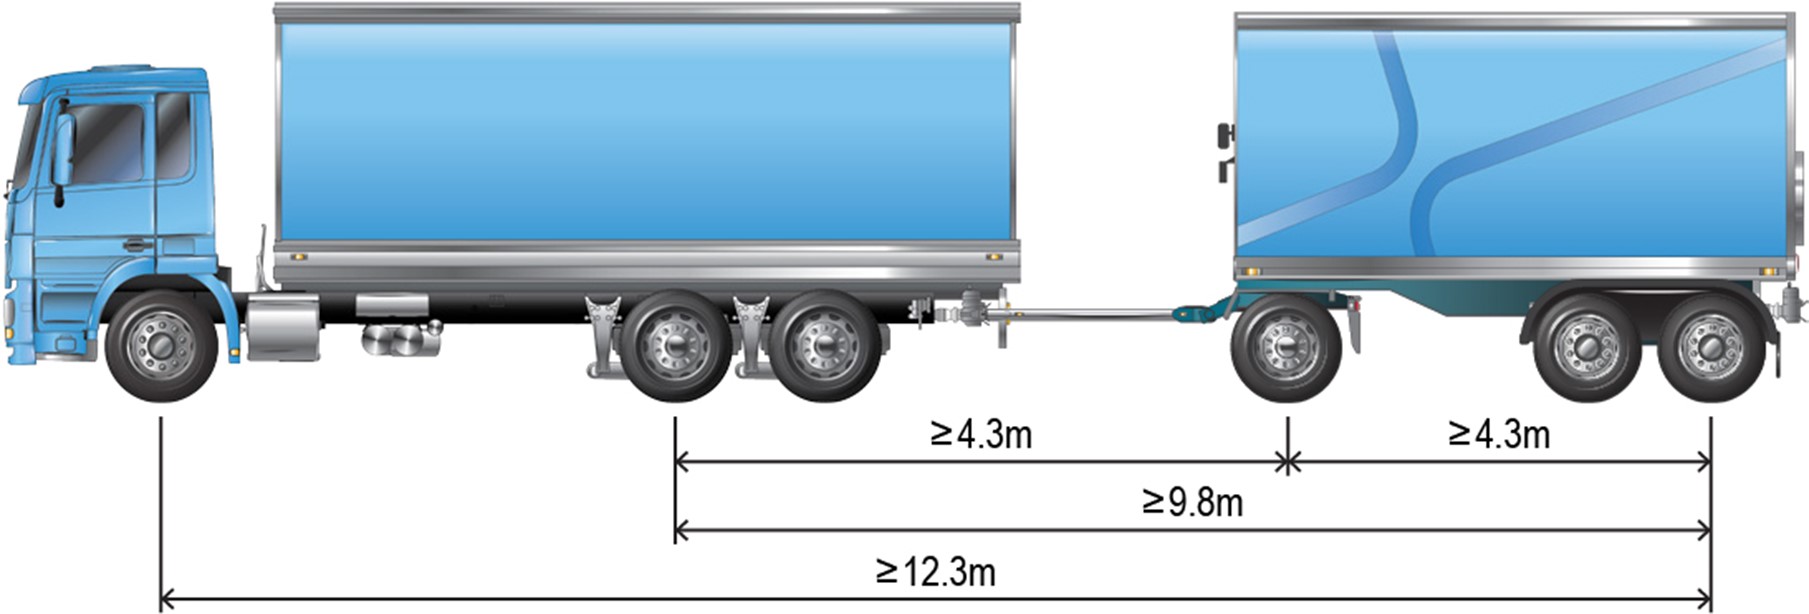 An eligible truck and 3-axle dog trailer